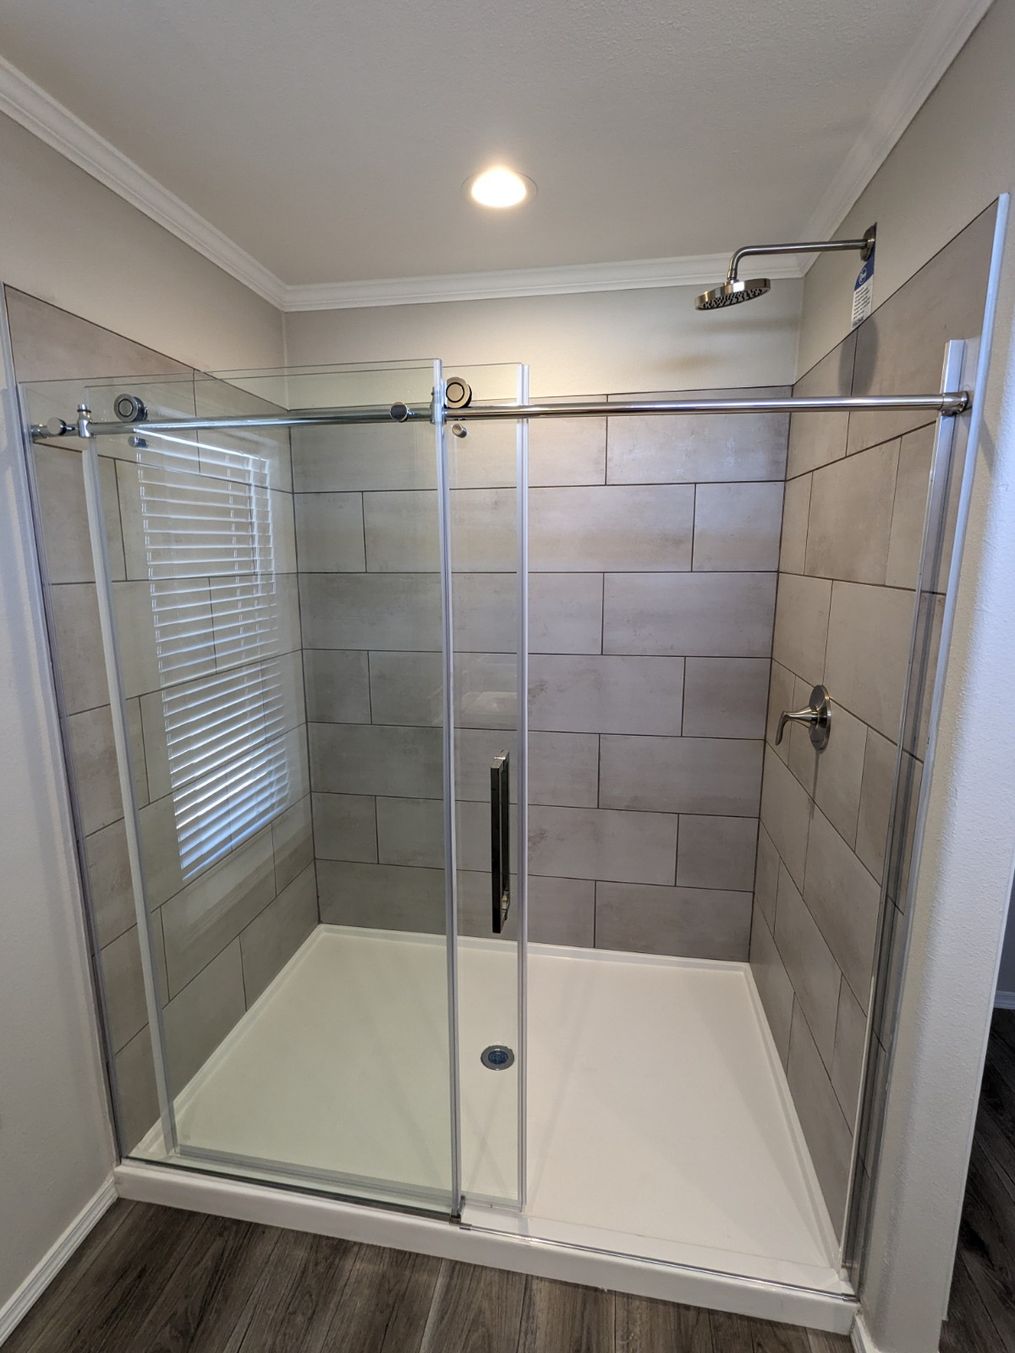 The CATALINA Primary Bathroom. This Manufactured Mobile Home features 3 bedrooms and 2 baths.